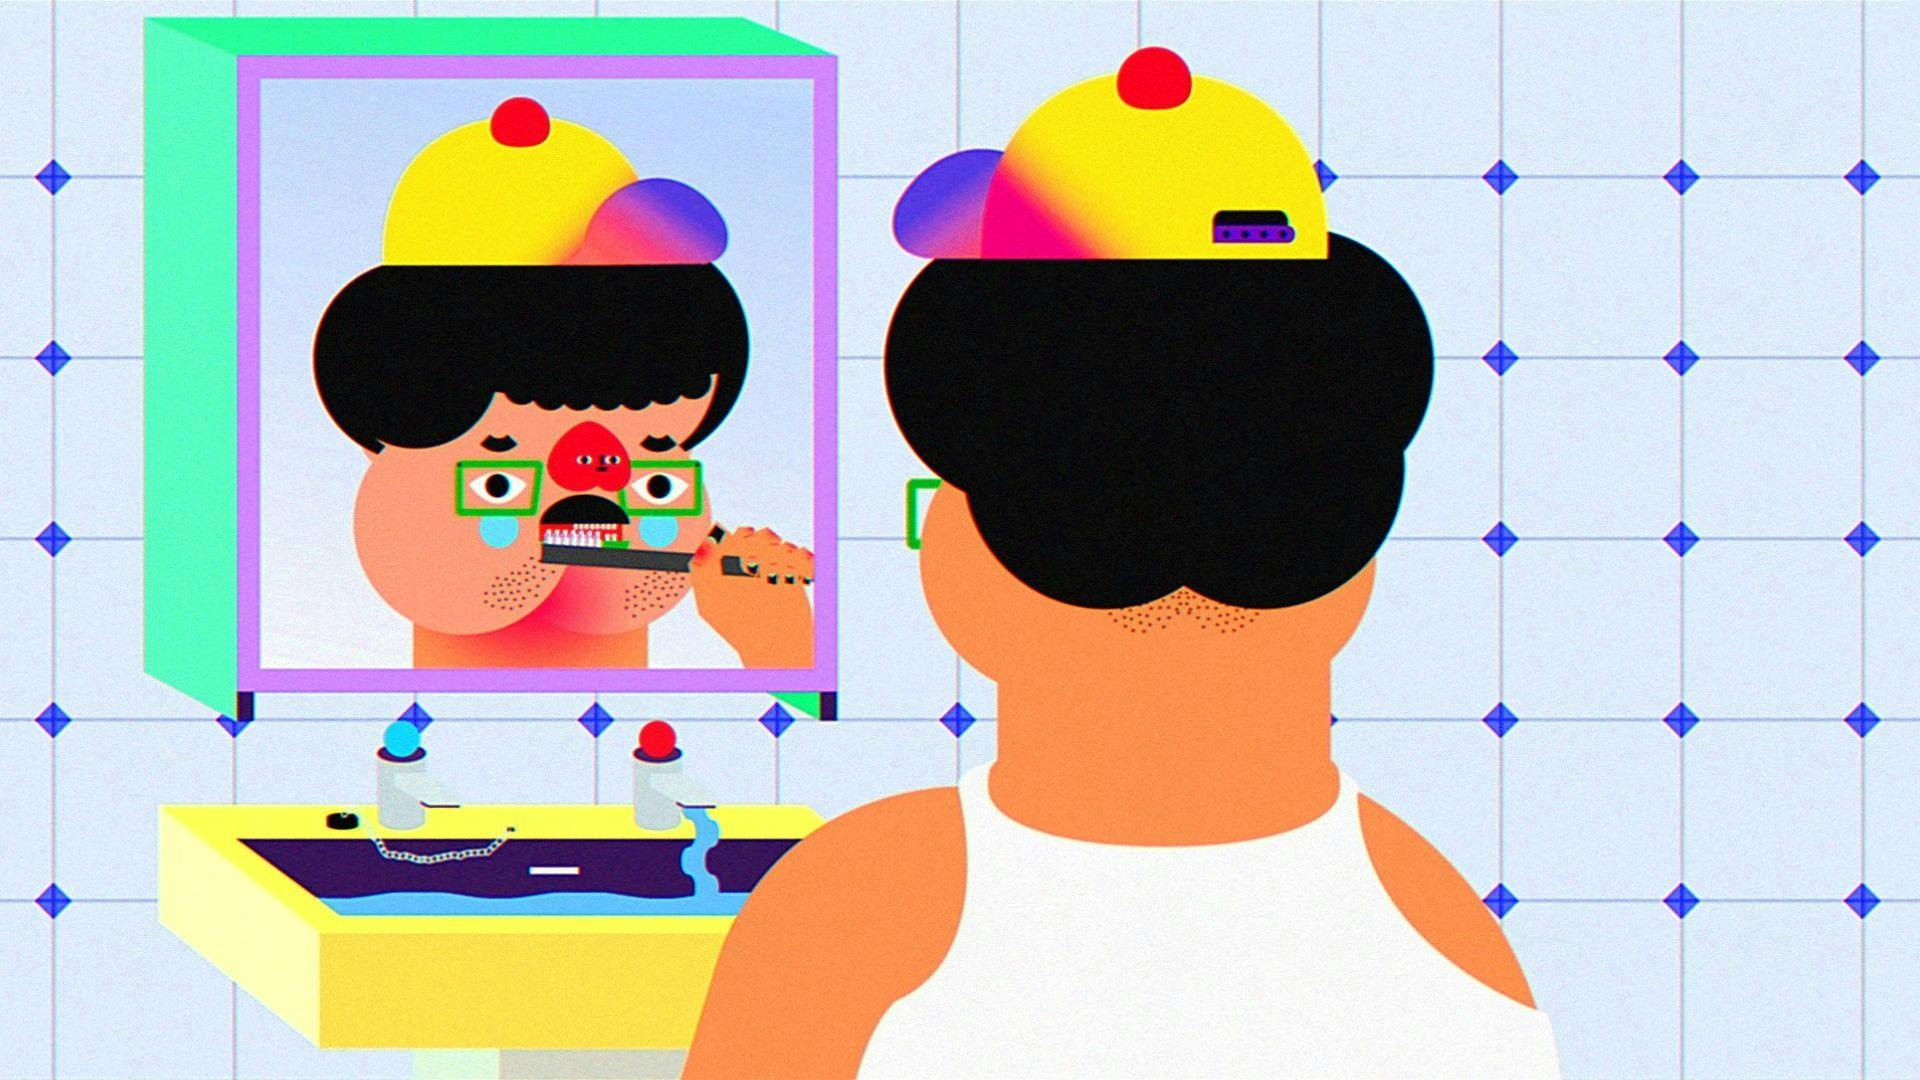 Computer-generated, cartoon-like image of someone looking into the mirror as they brush their teeth. The tap is turned on and the sink is filling up.